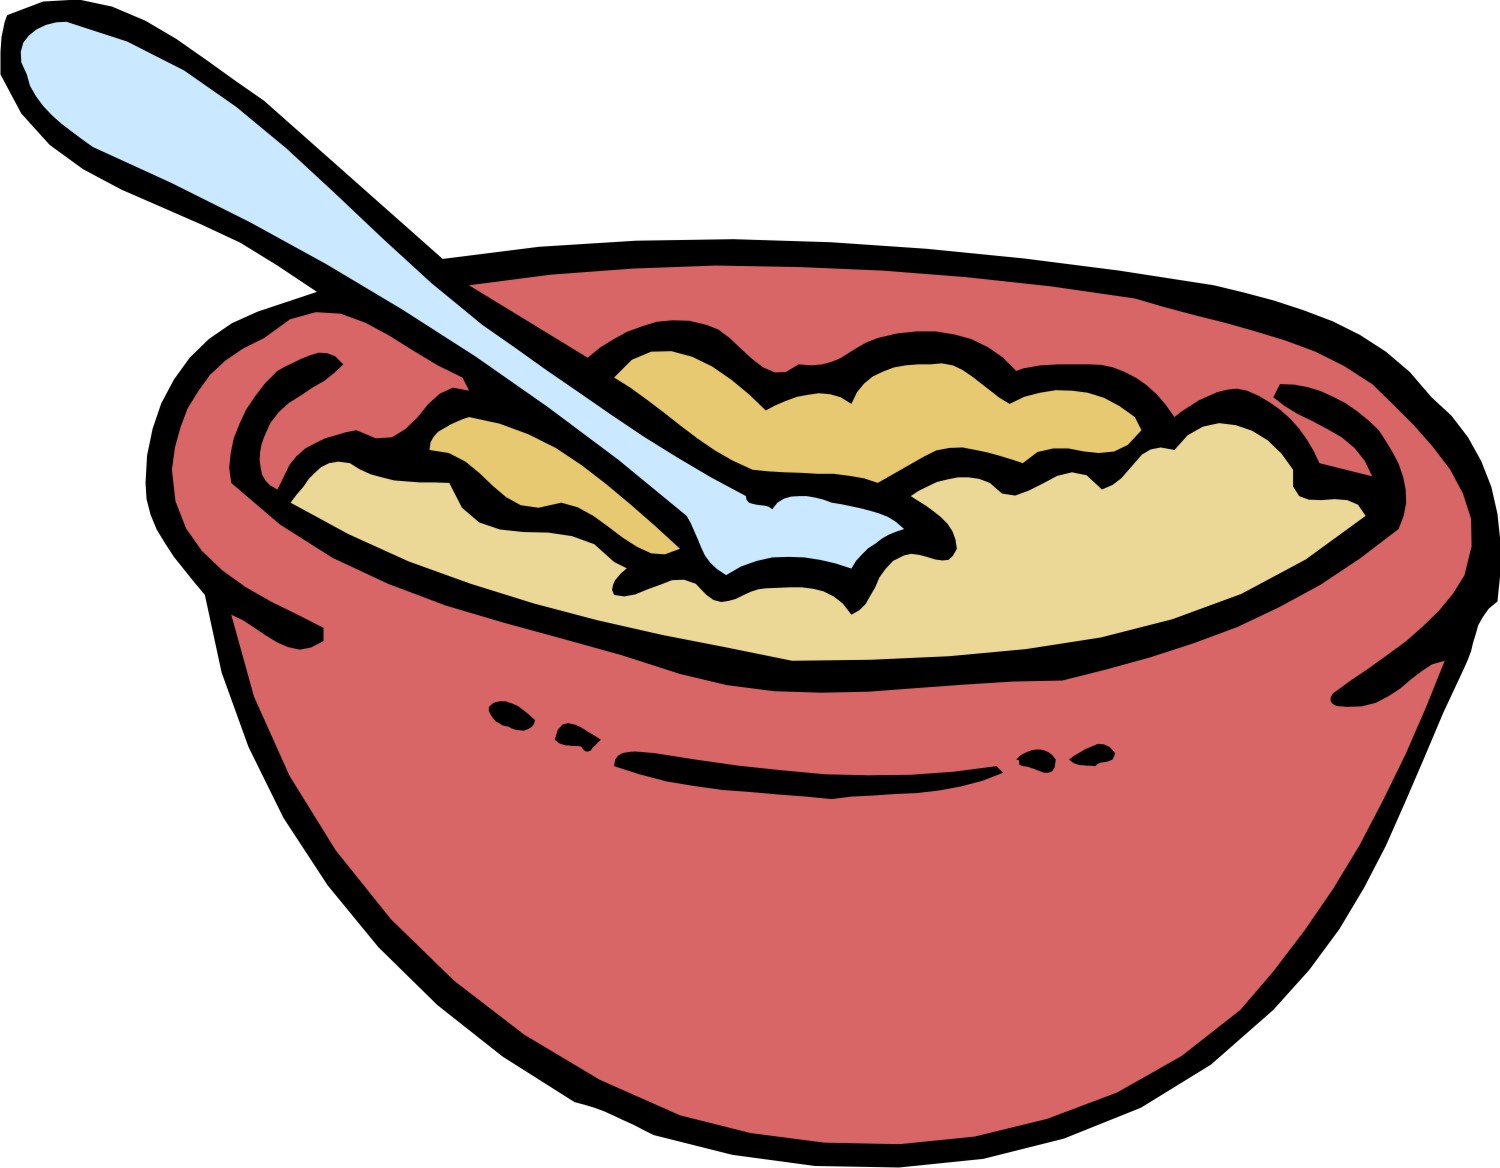 Bowl Of Cereal Clip Art